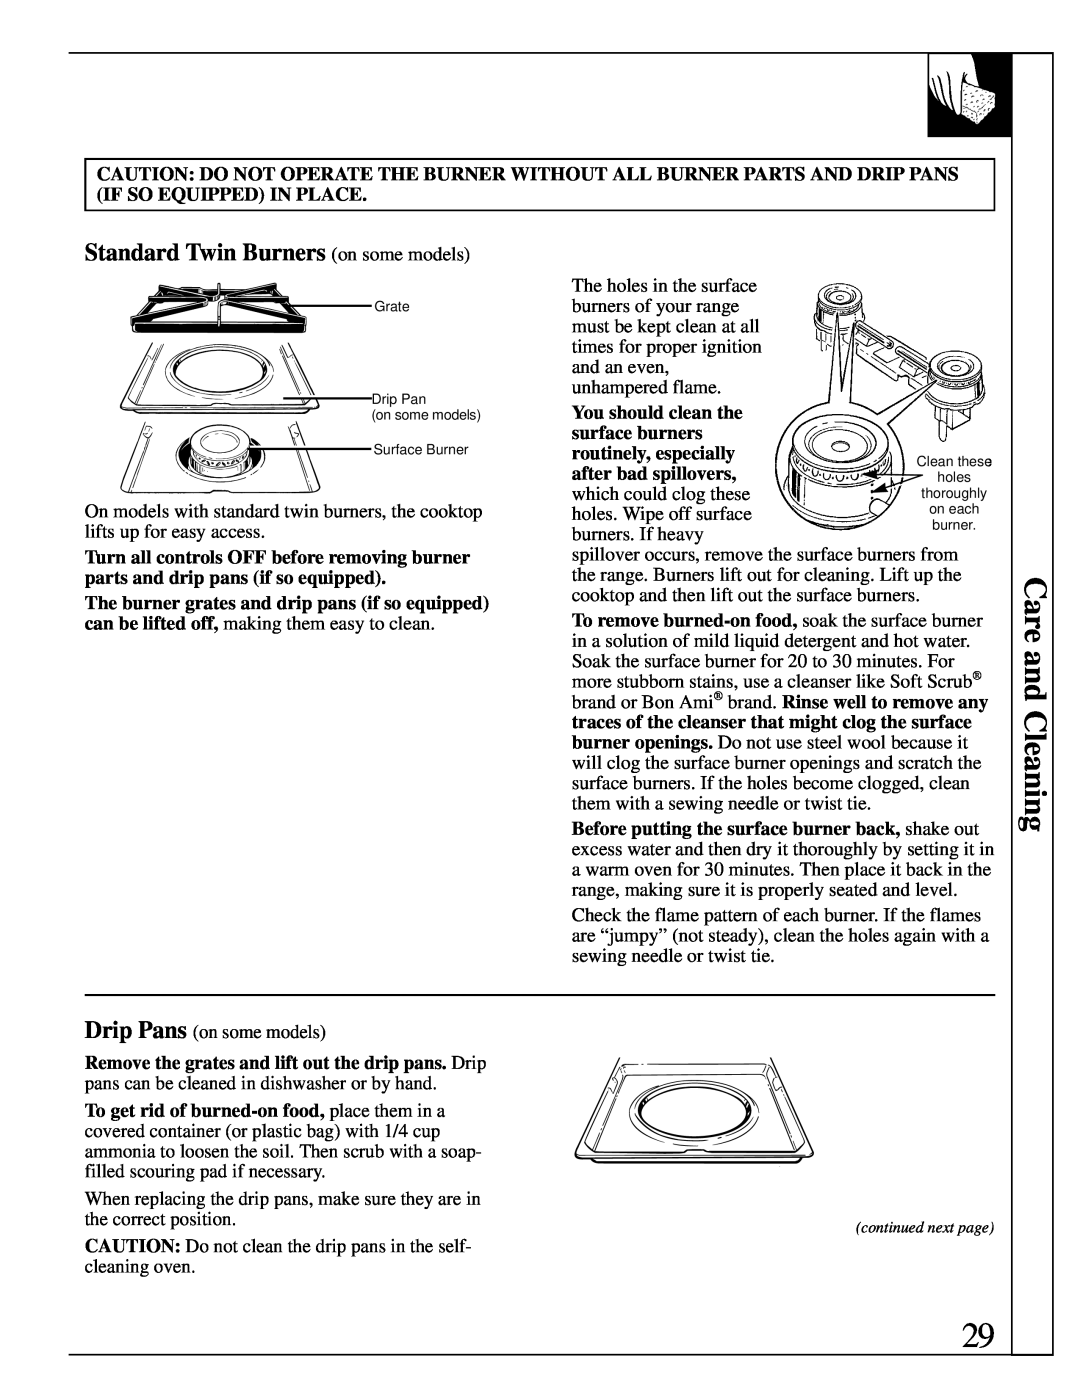 Hotpoint RGB744 installation instructions Care and Cleaning, Standard Twin Burners on some models 